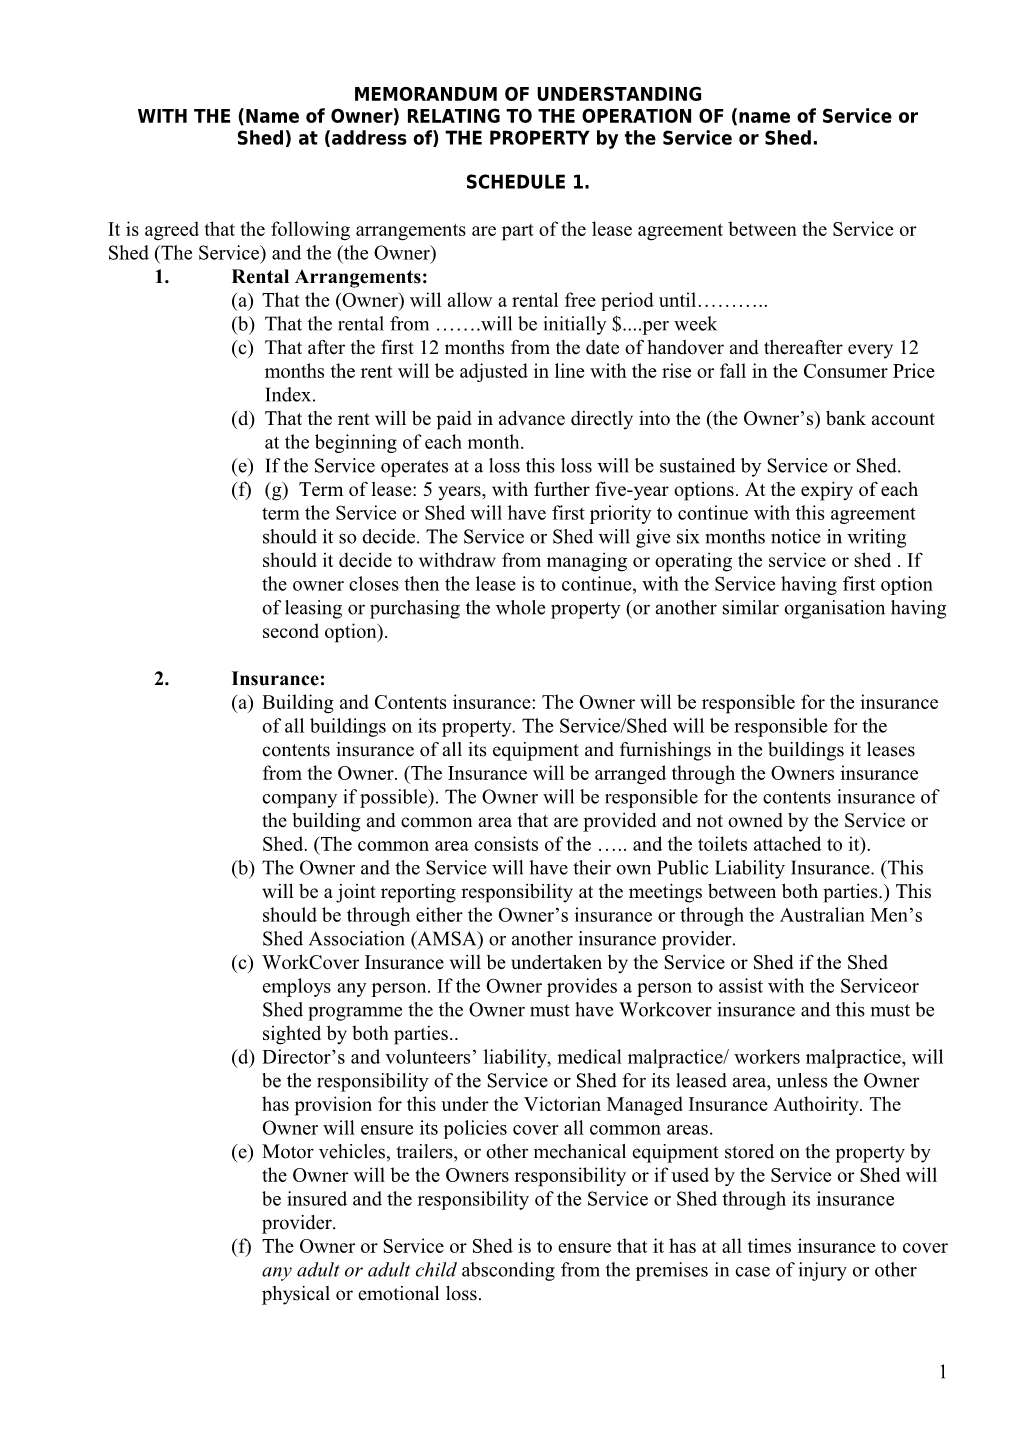 Memorandum of Understanding with the Mirboo North Uniting Church Relating to the Operation of St